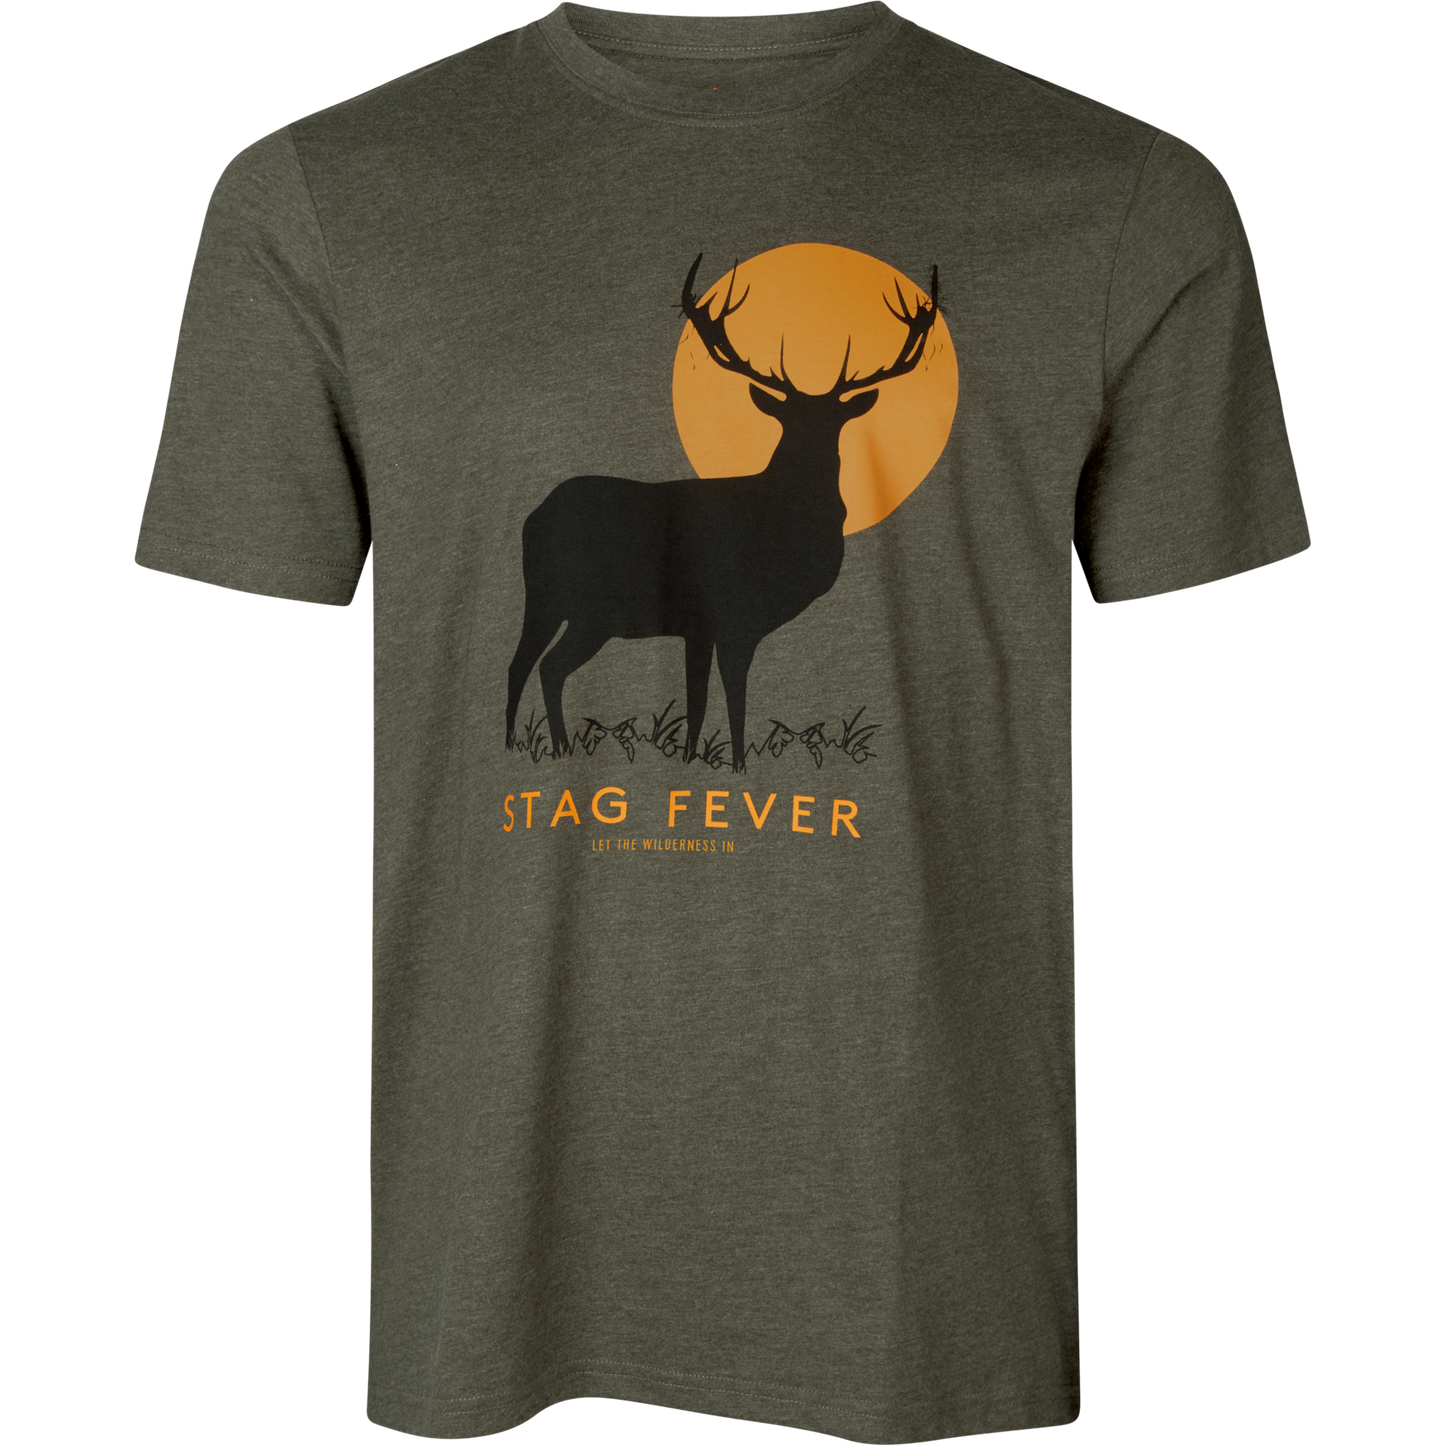 Stag Fever T-Shirt